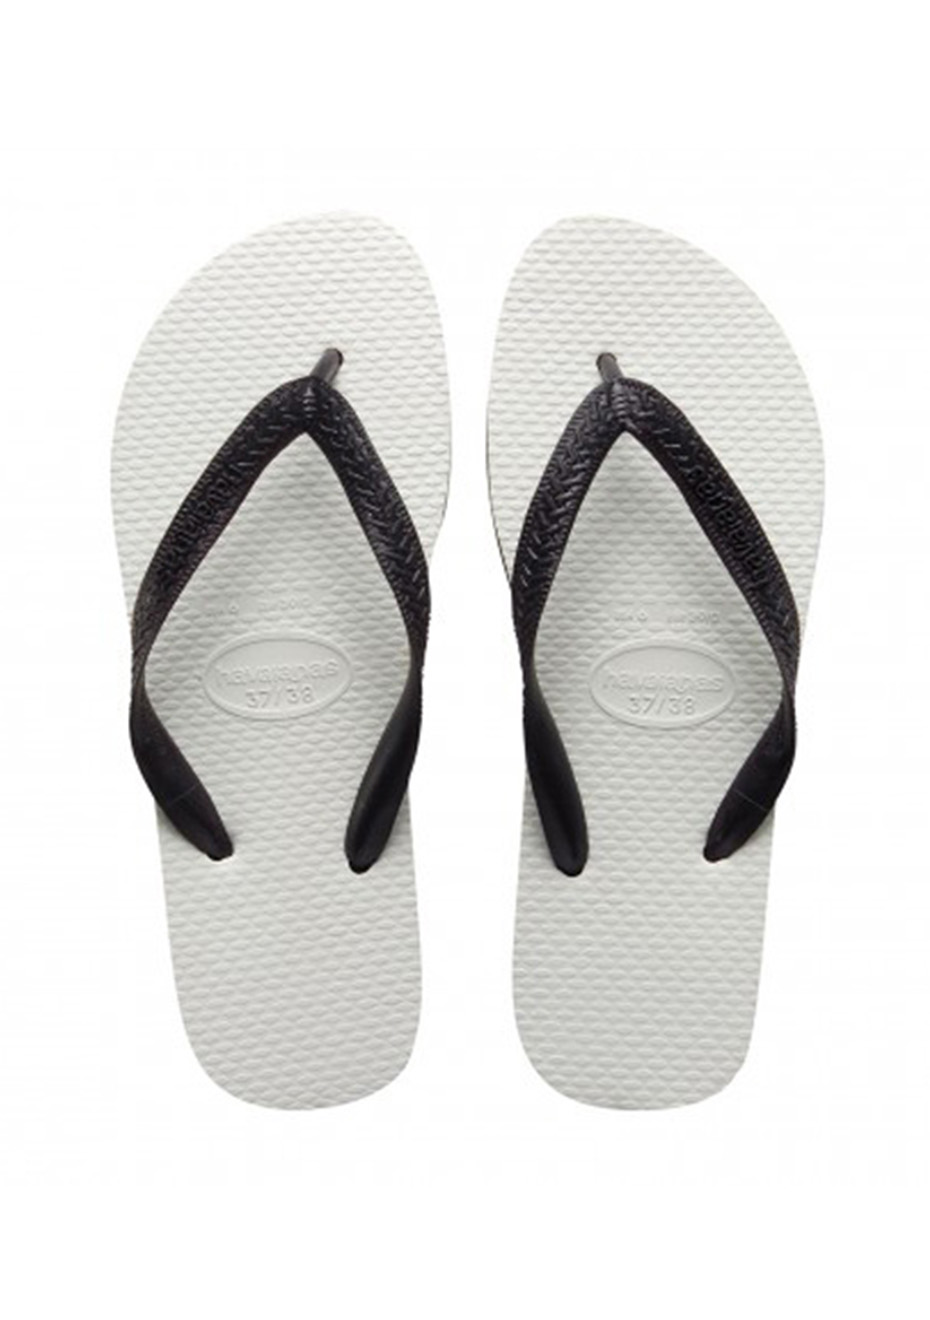 havaianas extra soft rubber sole